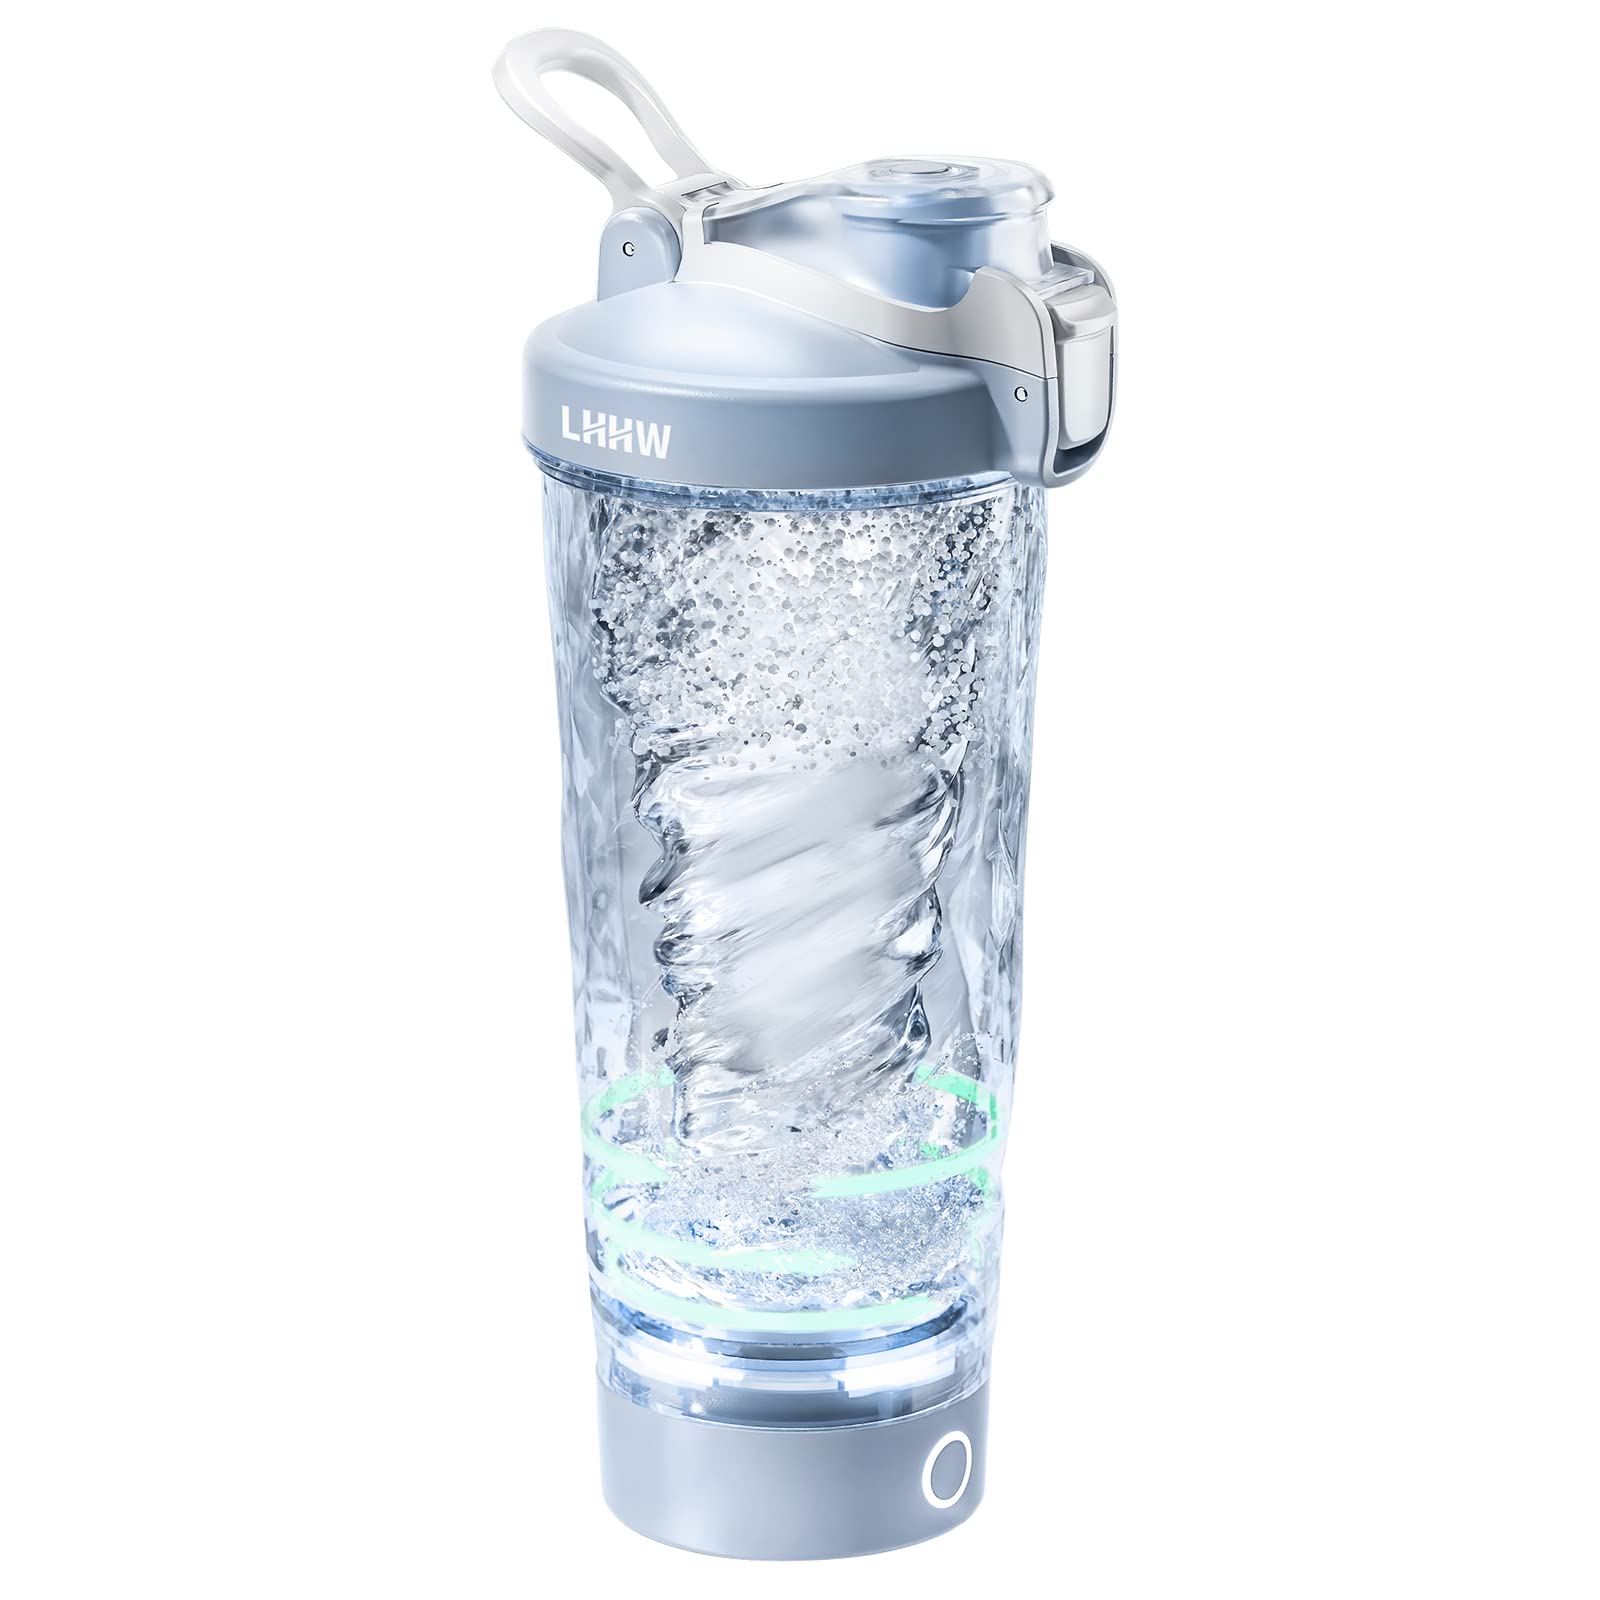 LHHW Electric Shaker Bottle, Protein Shaker Bottle with Atmosphere Light, Electric Blender made with Tritan-BPA Free, 500ml Rechargeable Mixer cup with USB Charging (Blue)